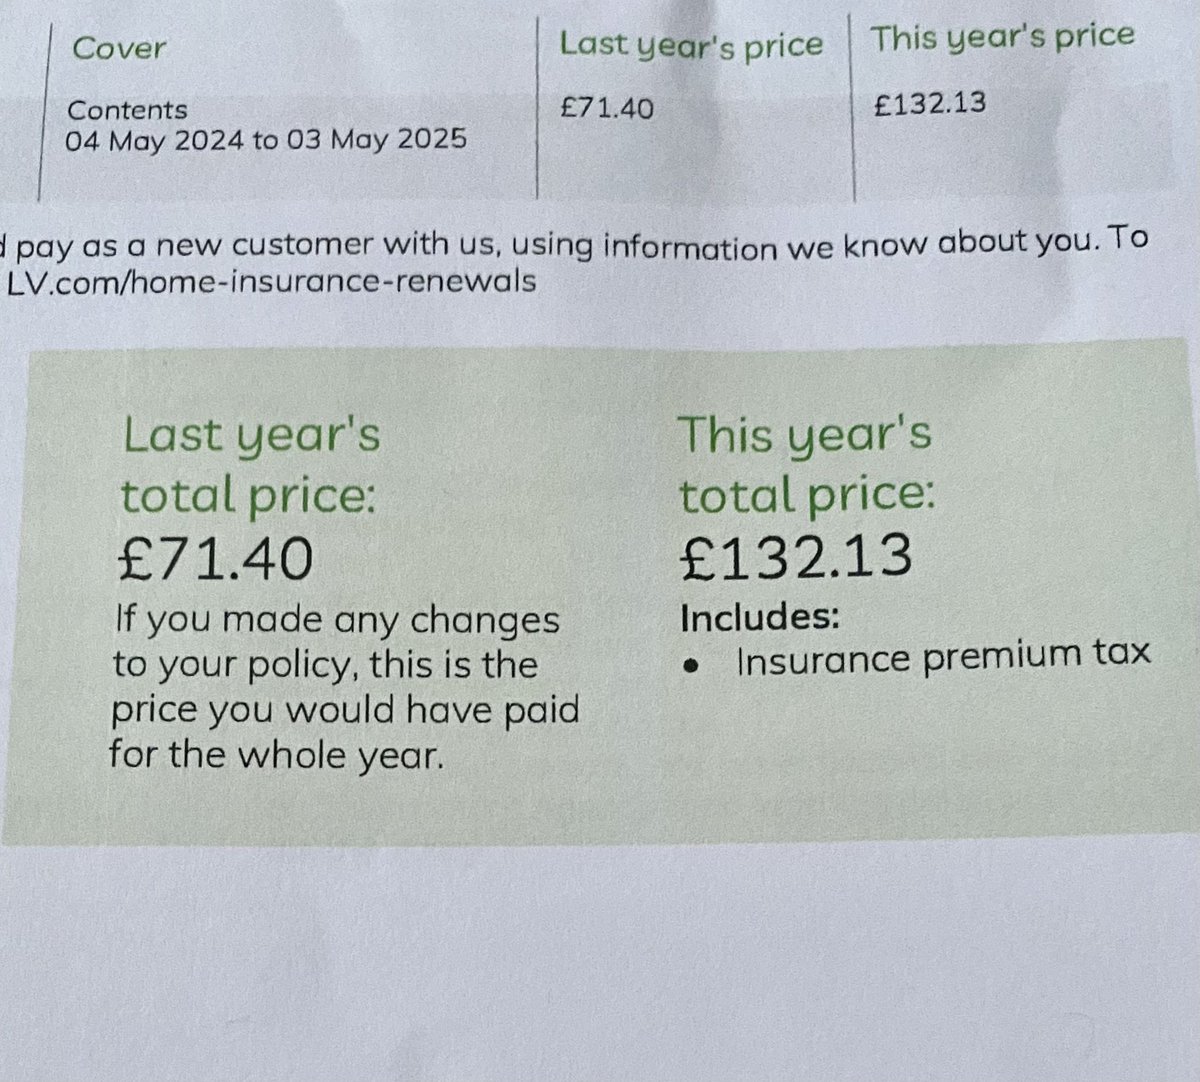 Renewal notice for a basic home insurance contents policy. Almost doubled in price. Never claimed. All details/circumstances unchanged from last year. No justification for this level of premium hike whatsoever. I know I can get it cheaper by going elsewhere. But it will still…